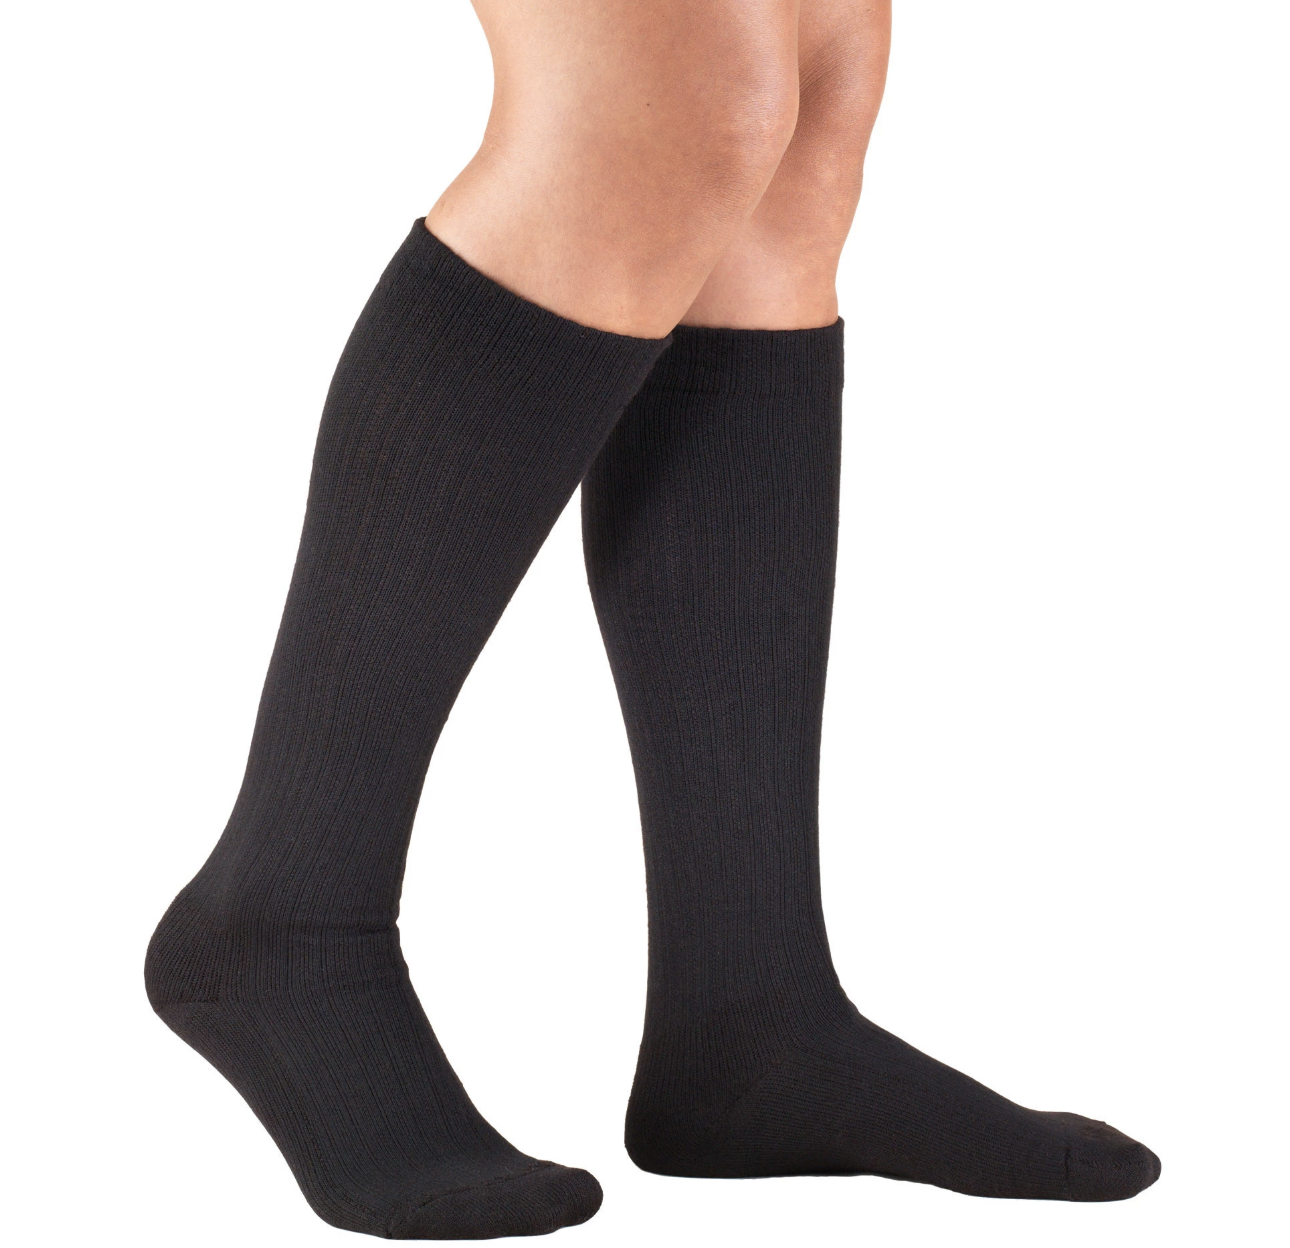 Best Compression Socks for Varicose Veins - (with Pictures!)